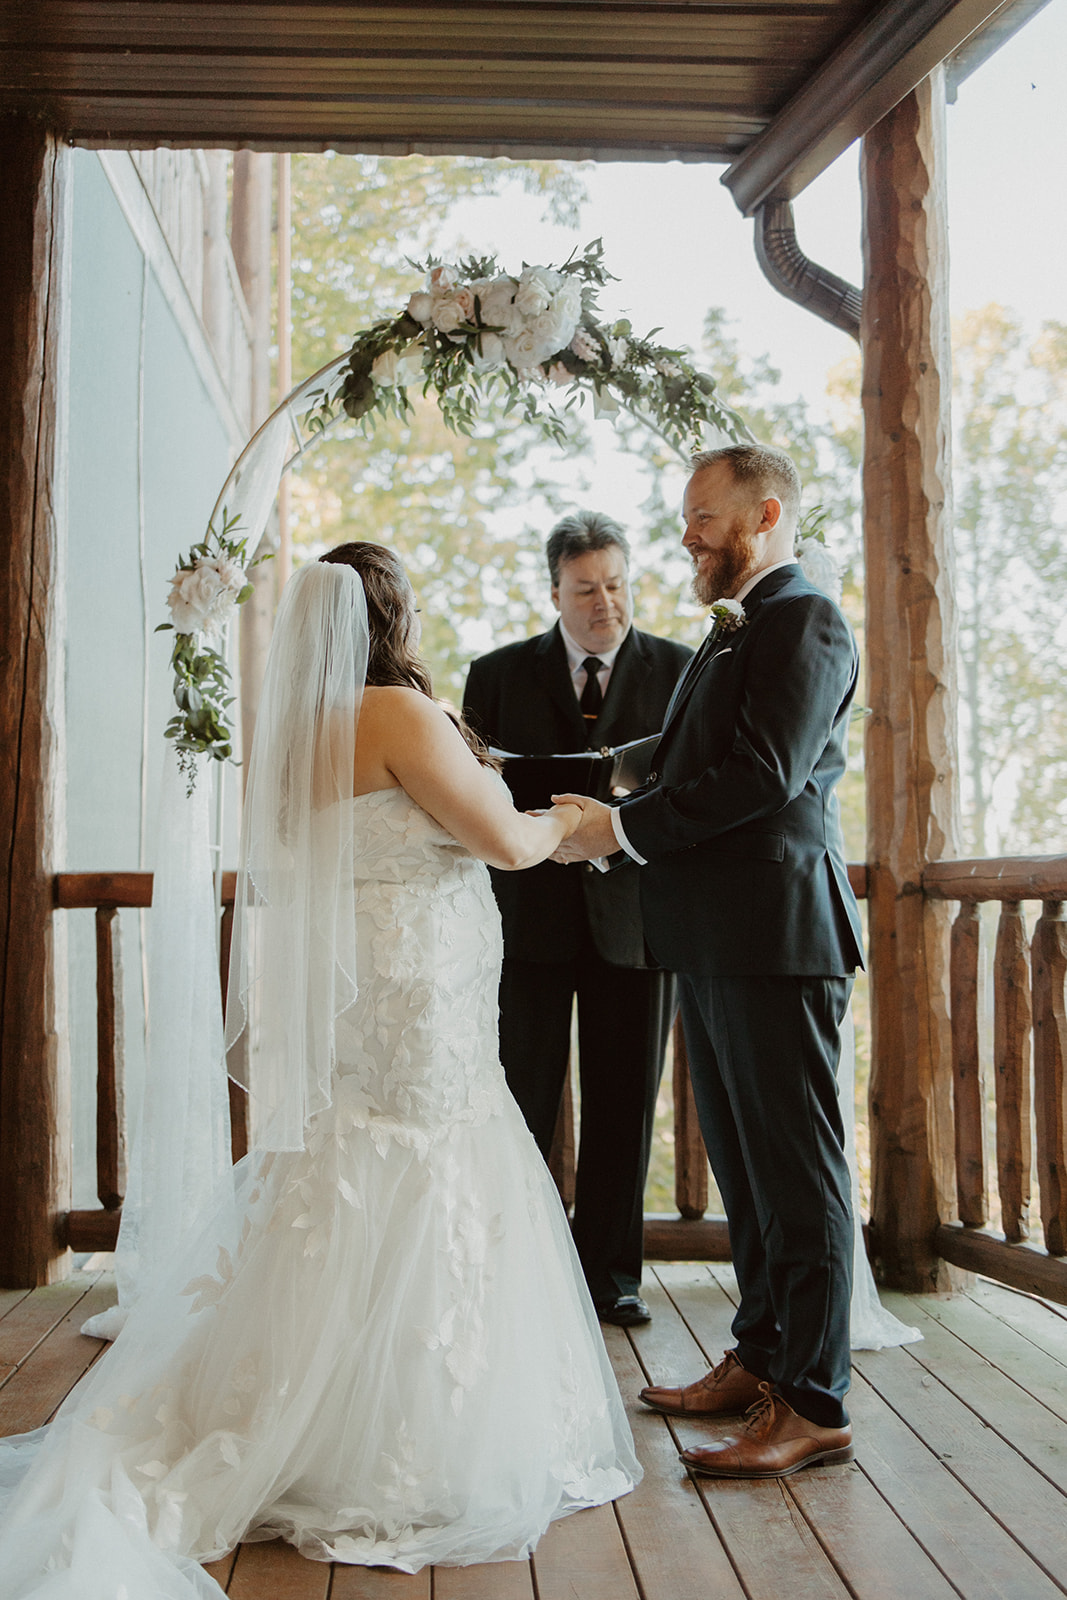 the couple standing at the altar